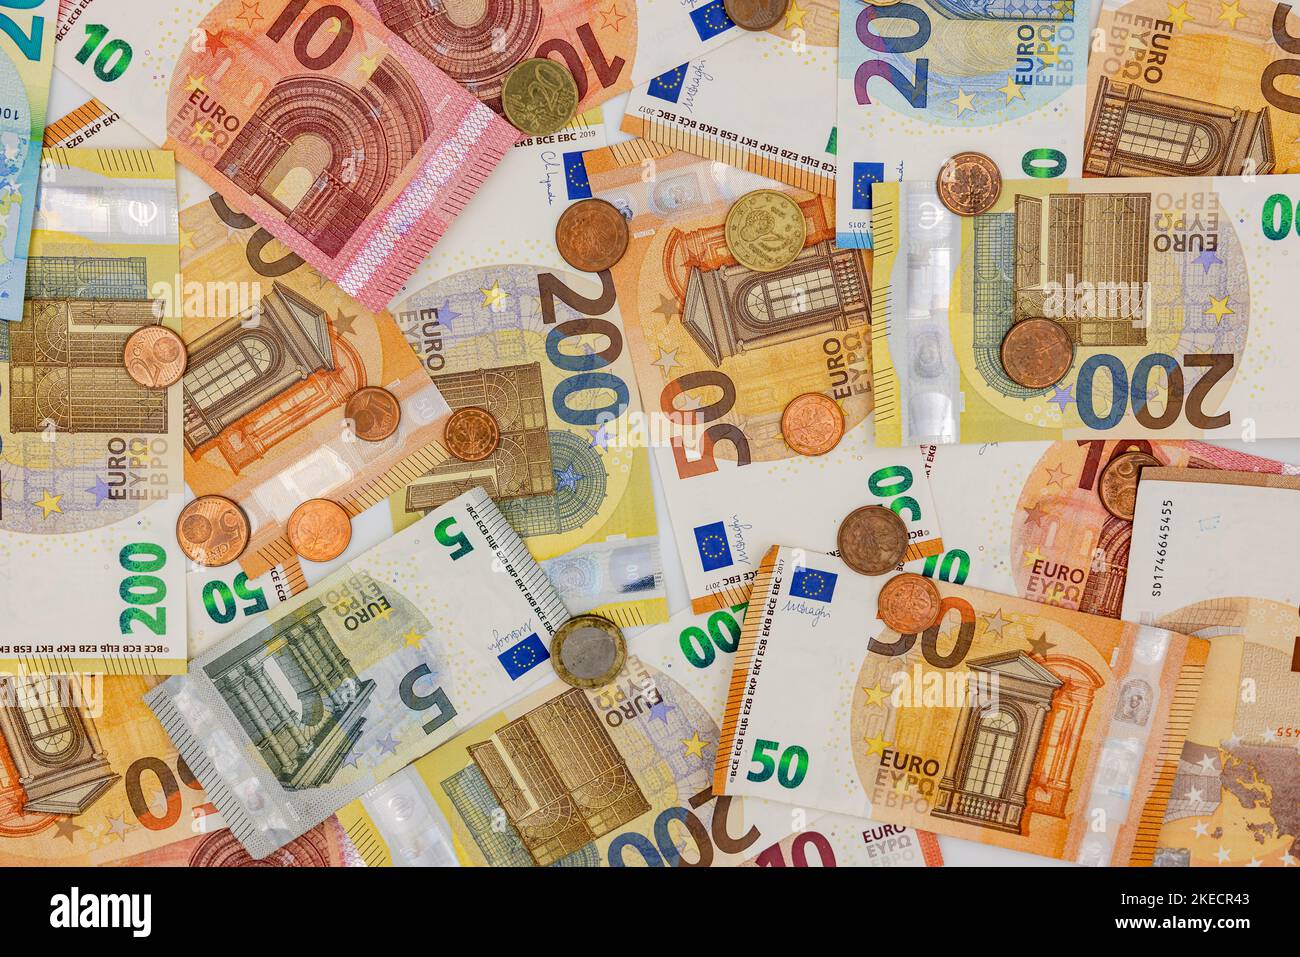 5 Euro, 10 Euro, 20 Euro, 50 Euro and 200 Euro banknotes and banknotes as a colorful and valuable background Stock Photo